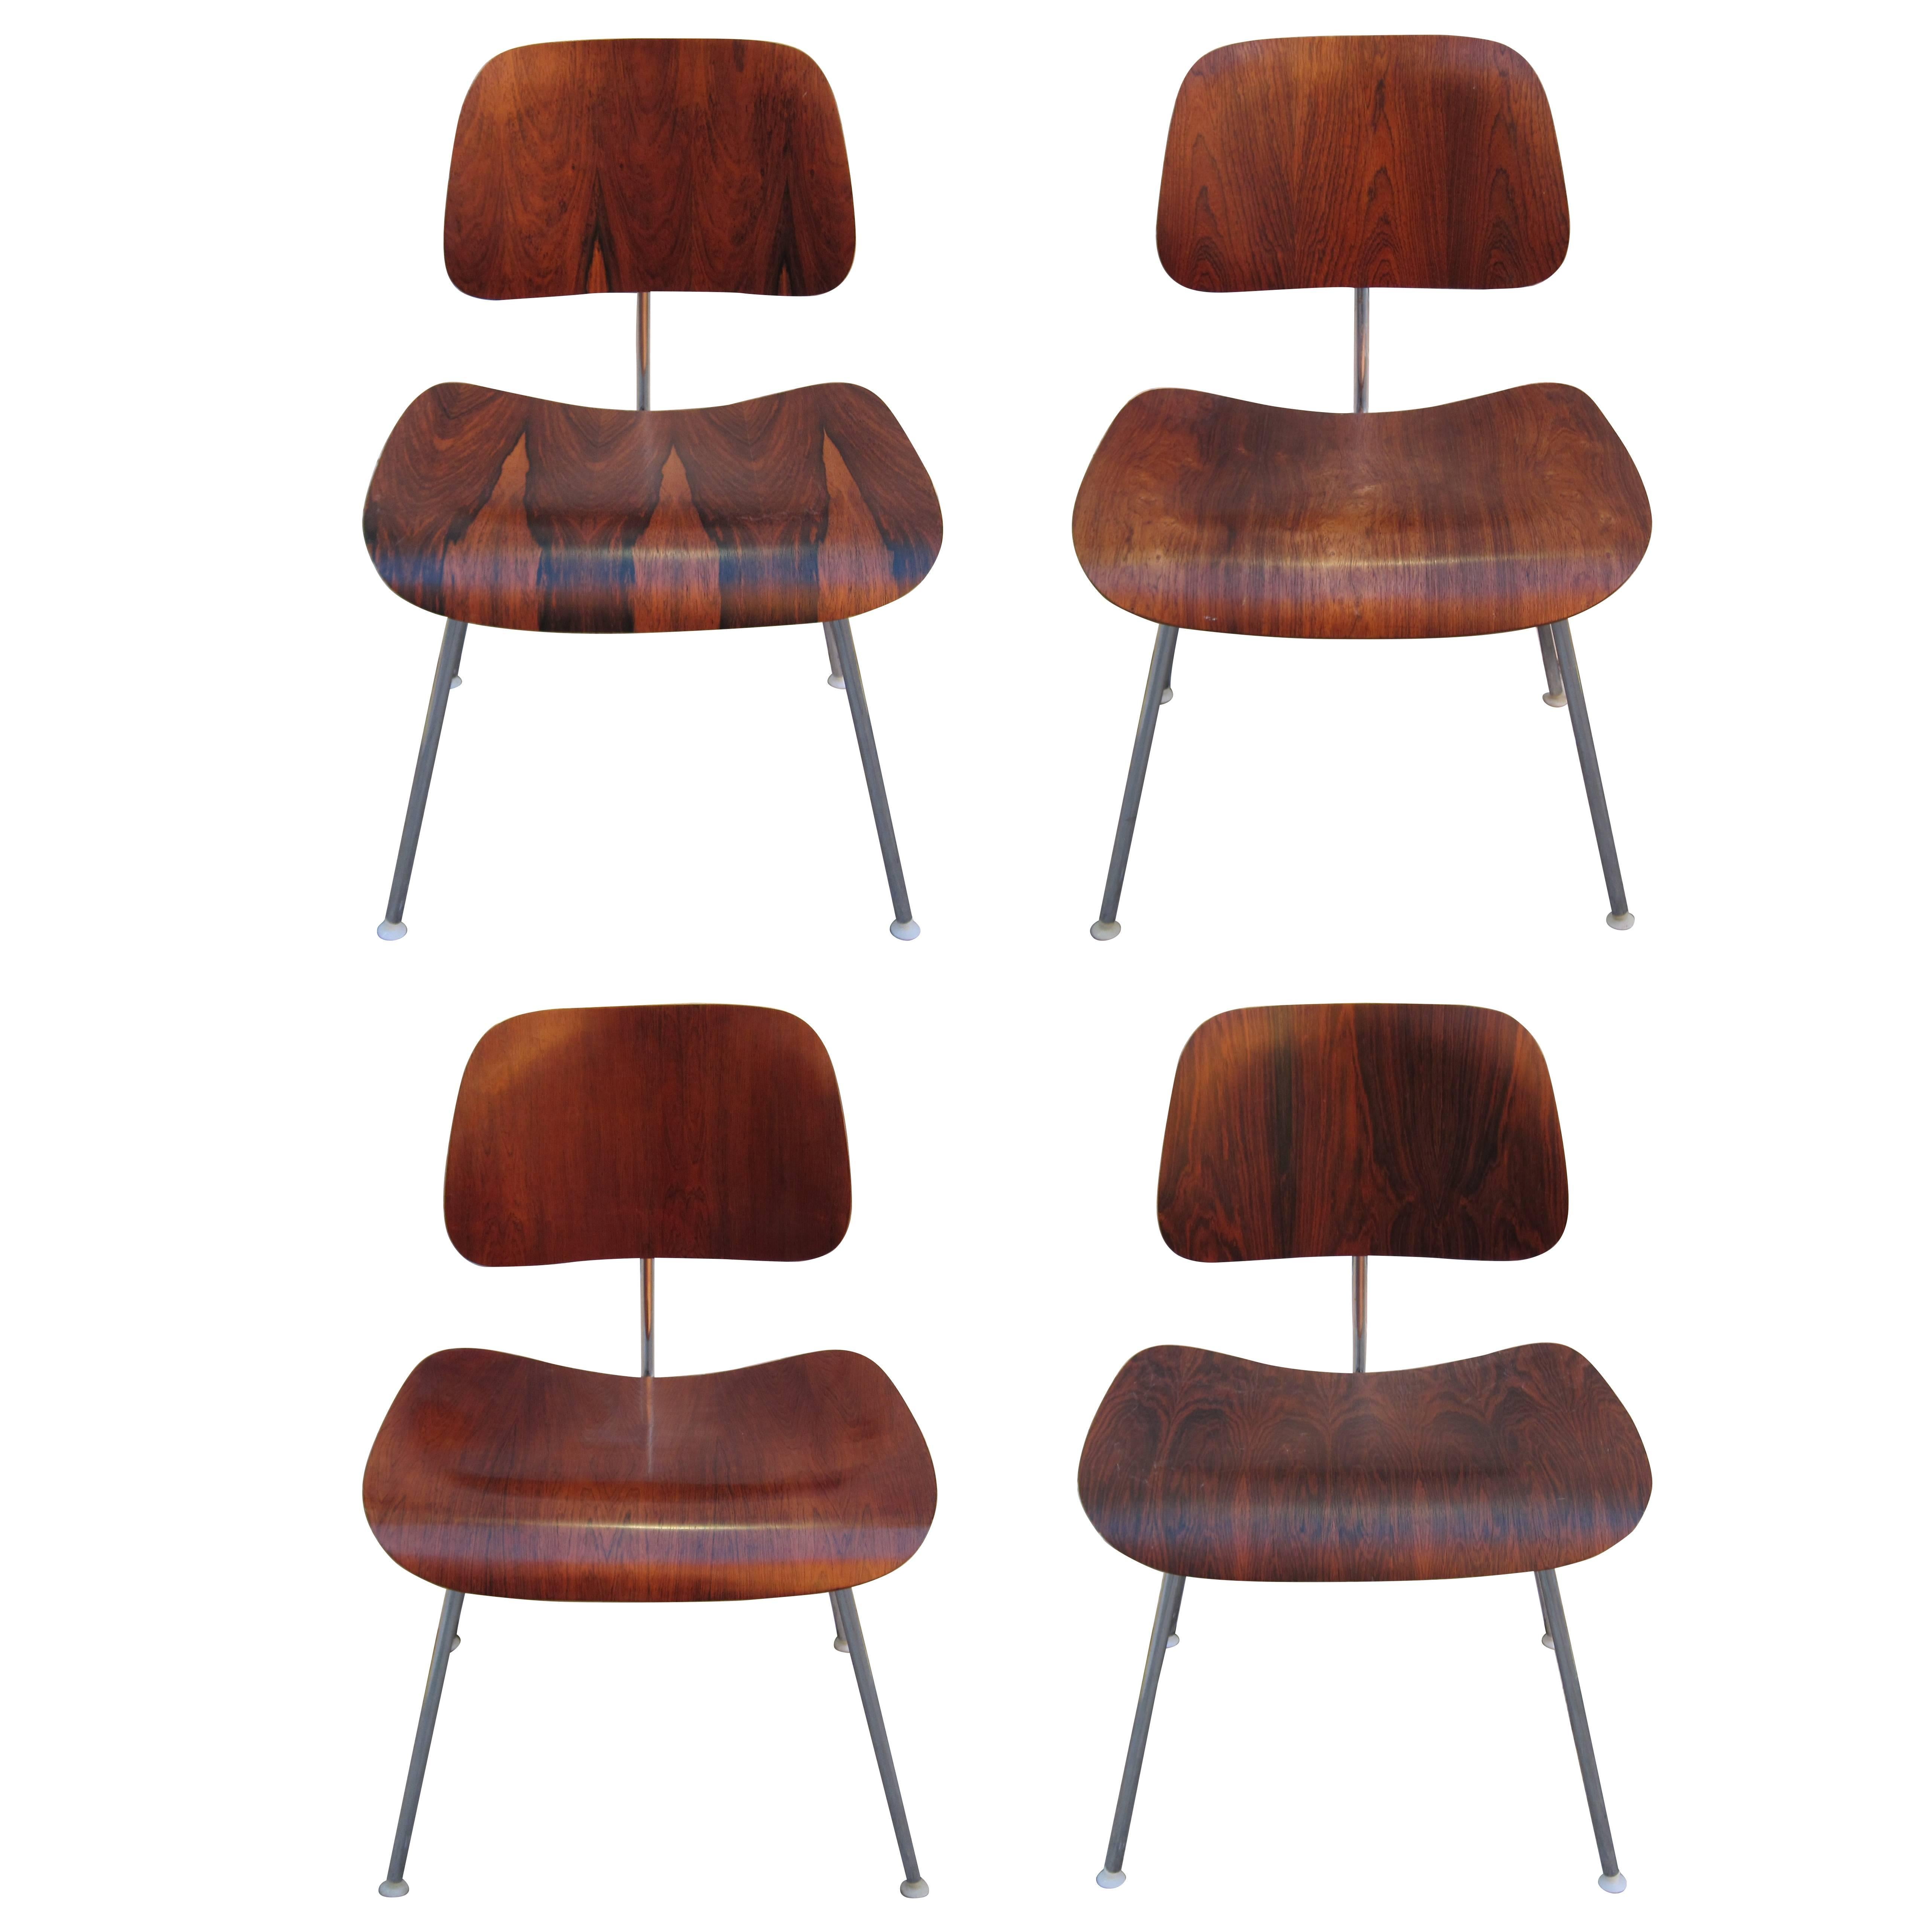 Four Rare Brazilian Rosewood Herman Miller Eames DCM Dining Chairs